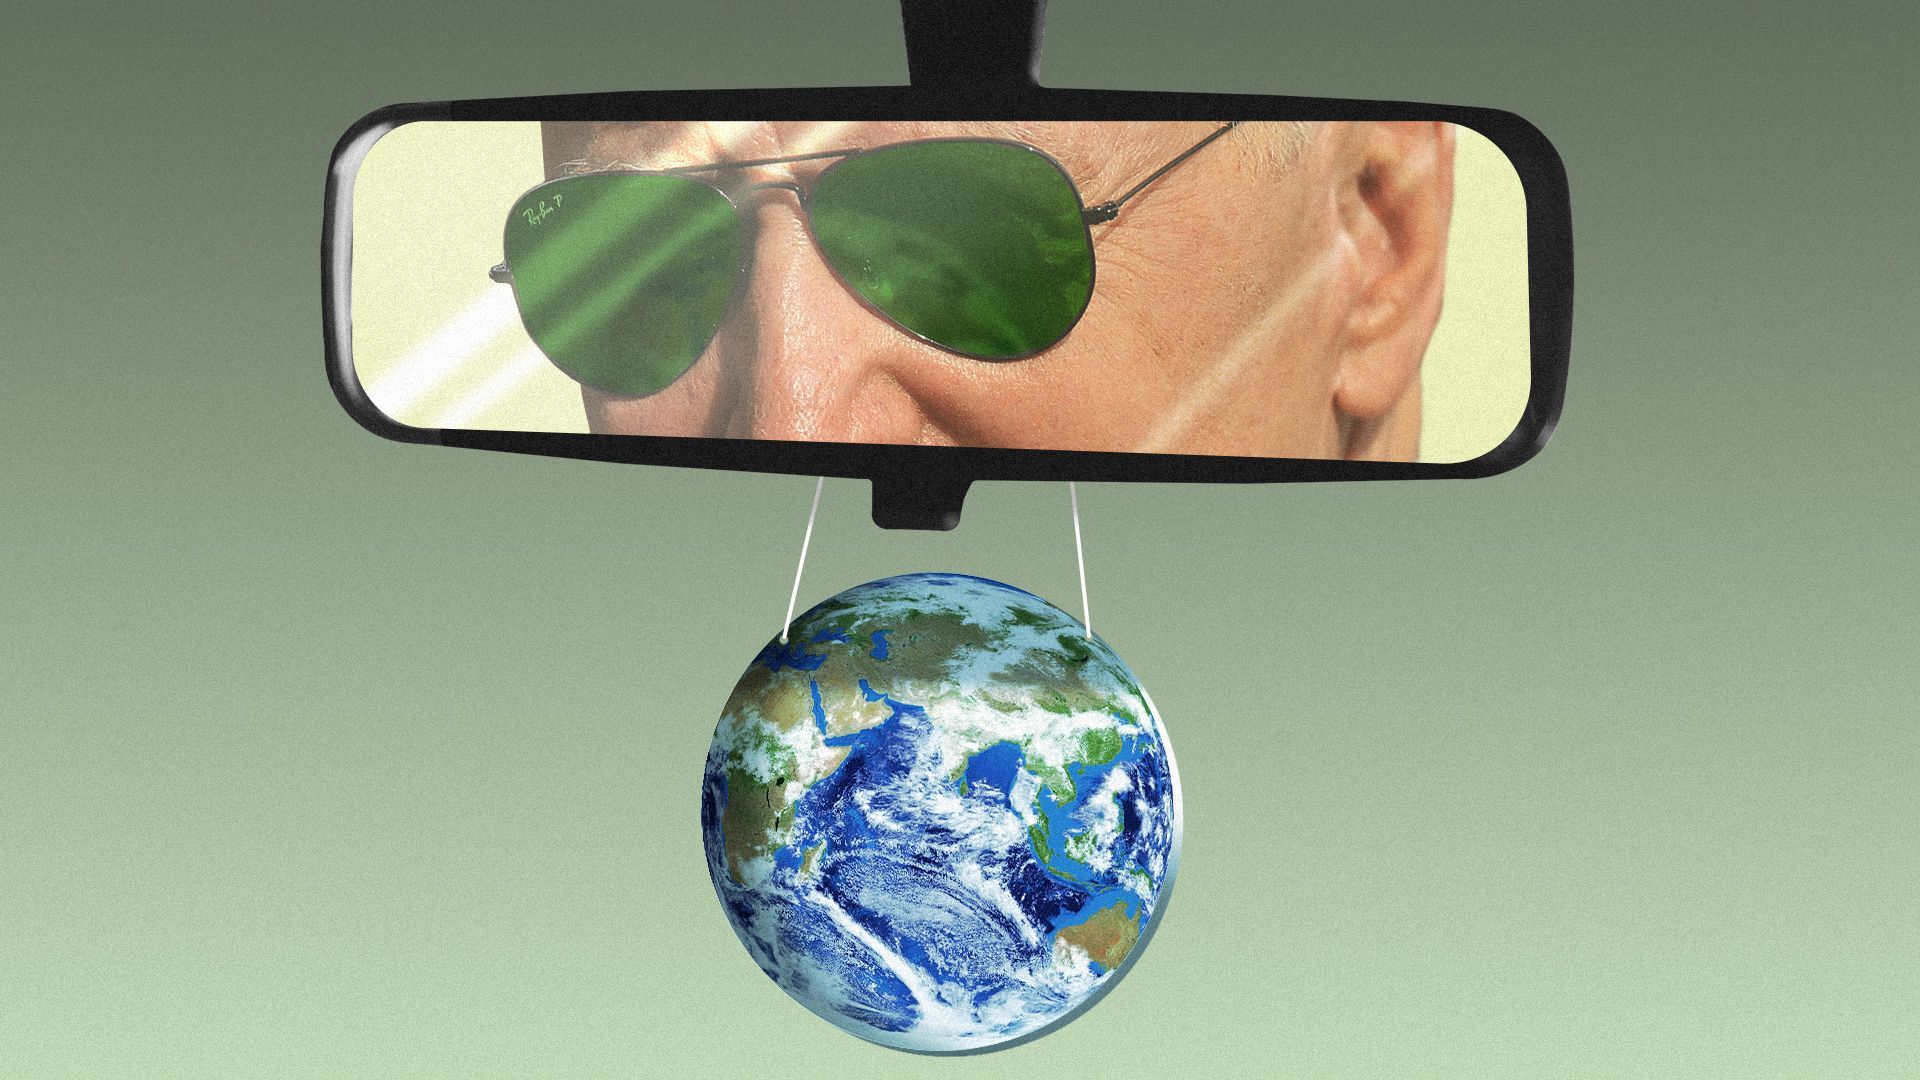 Photo illustration of President Biden looking in the rearview mirror of a car with an earth mirror ornament